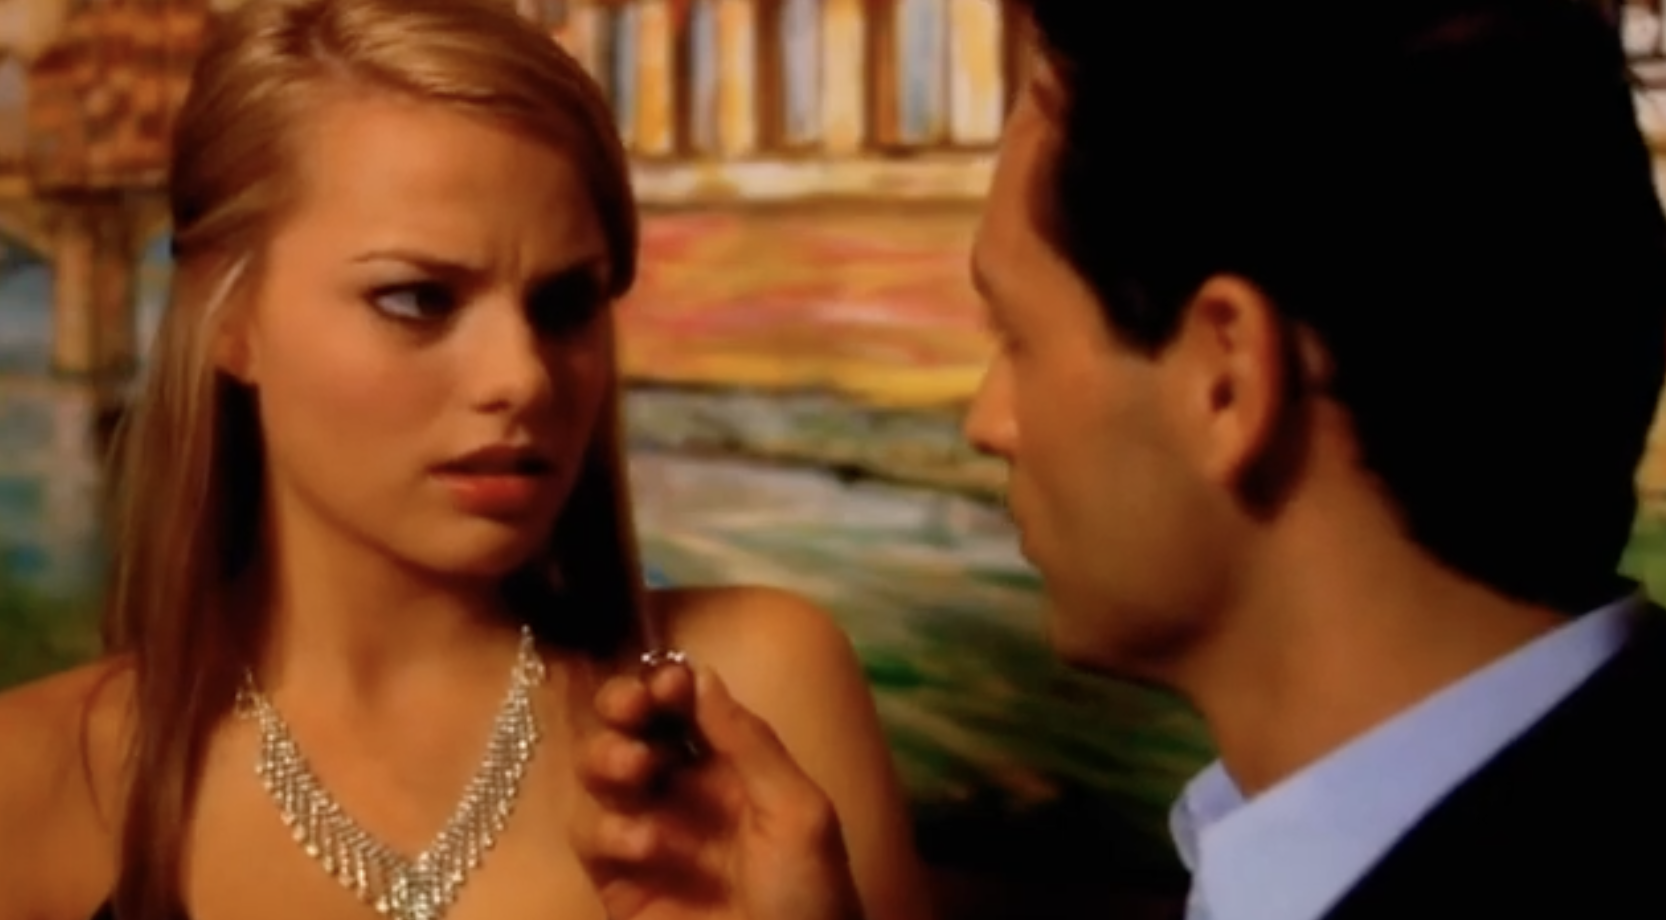 A young Margot Robbie is sitting at a restaurant looking at a man next to her with disgust